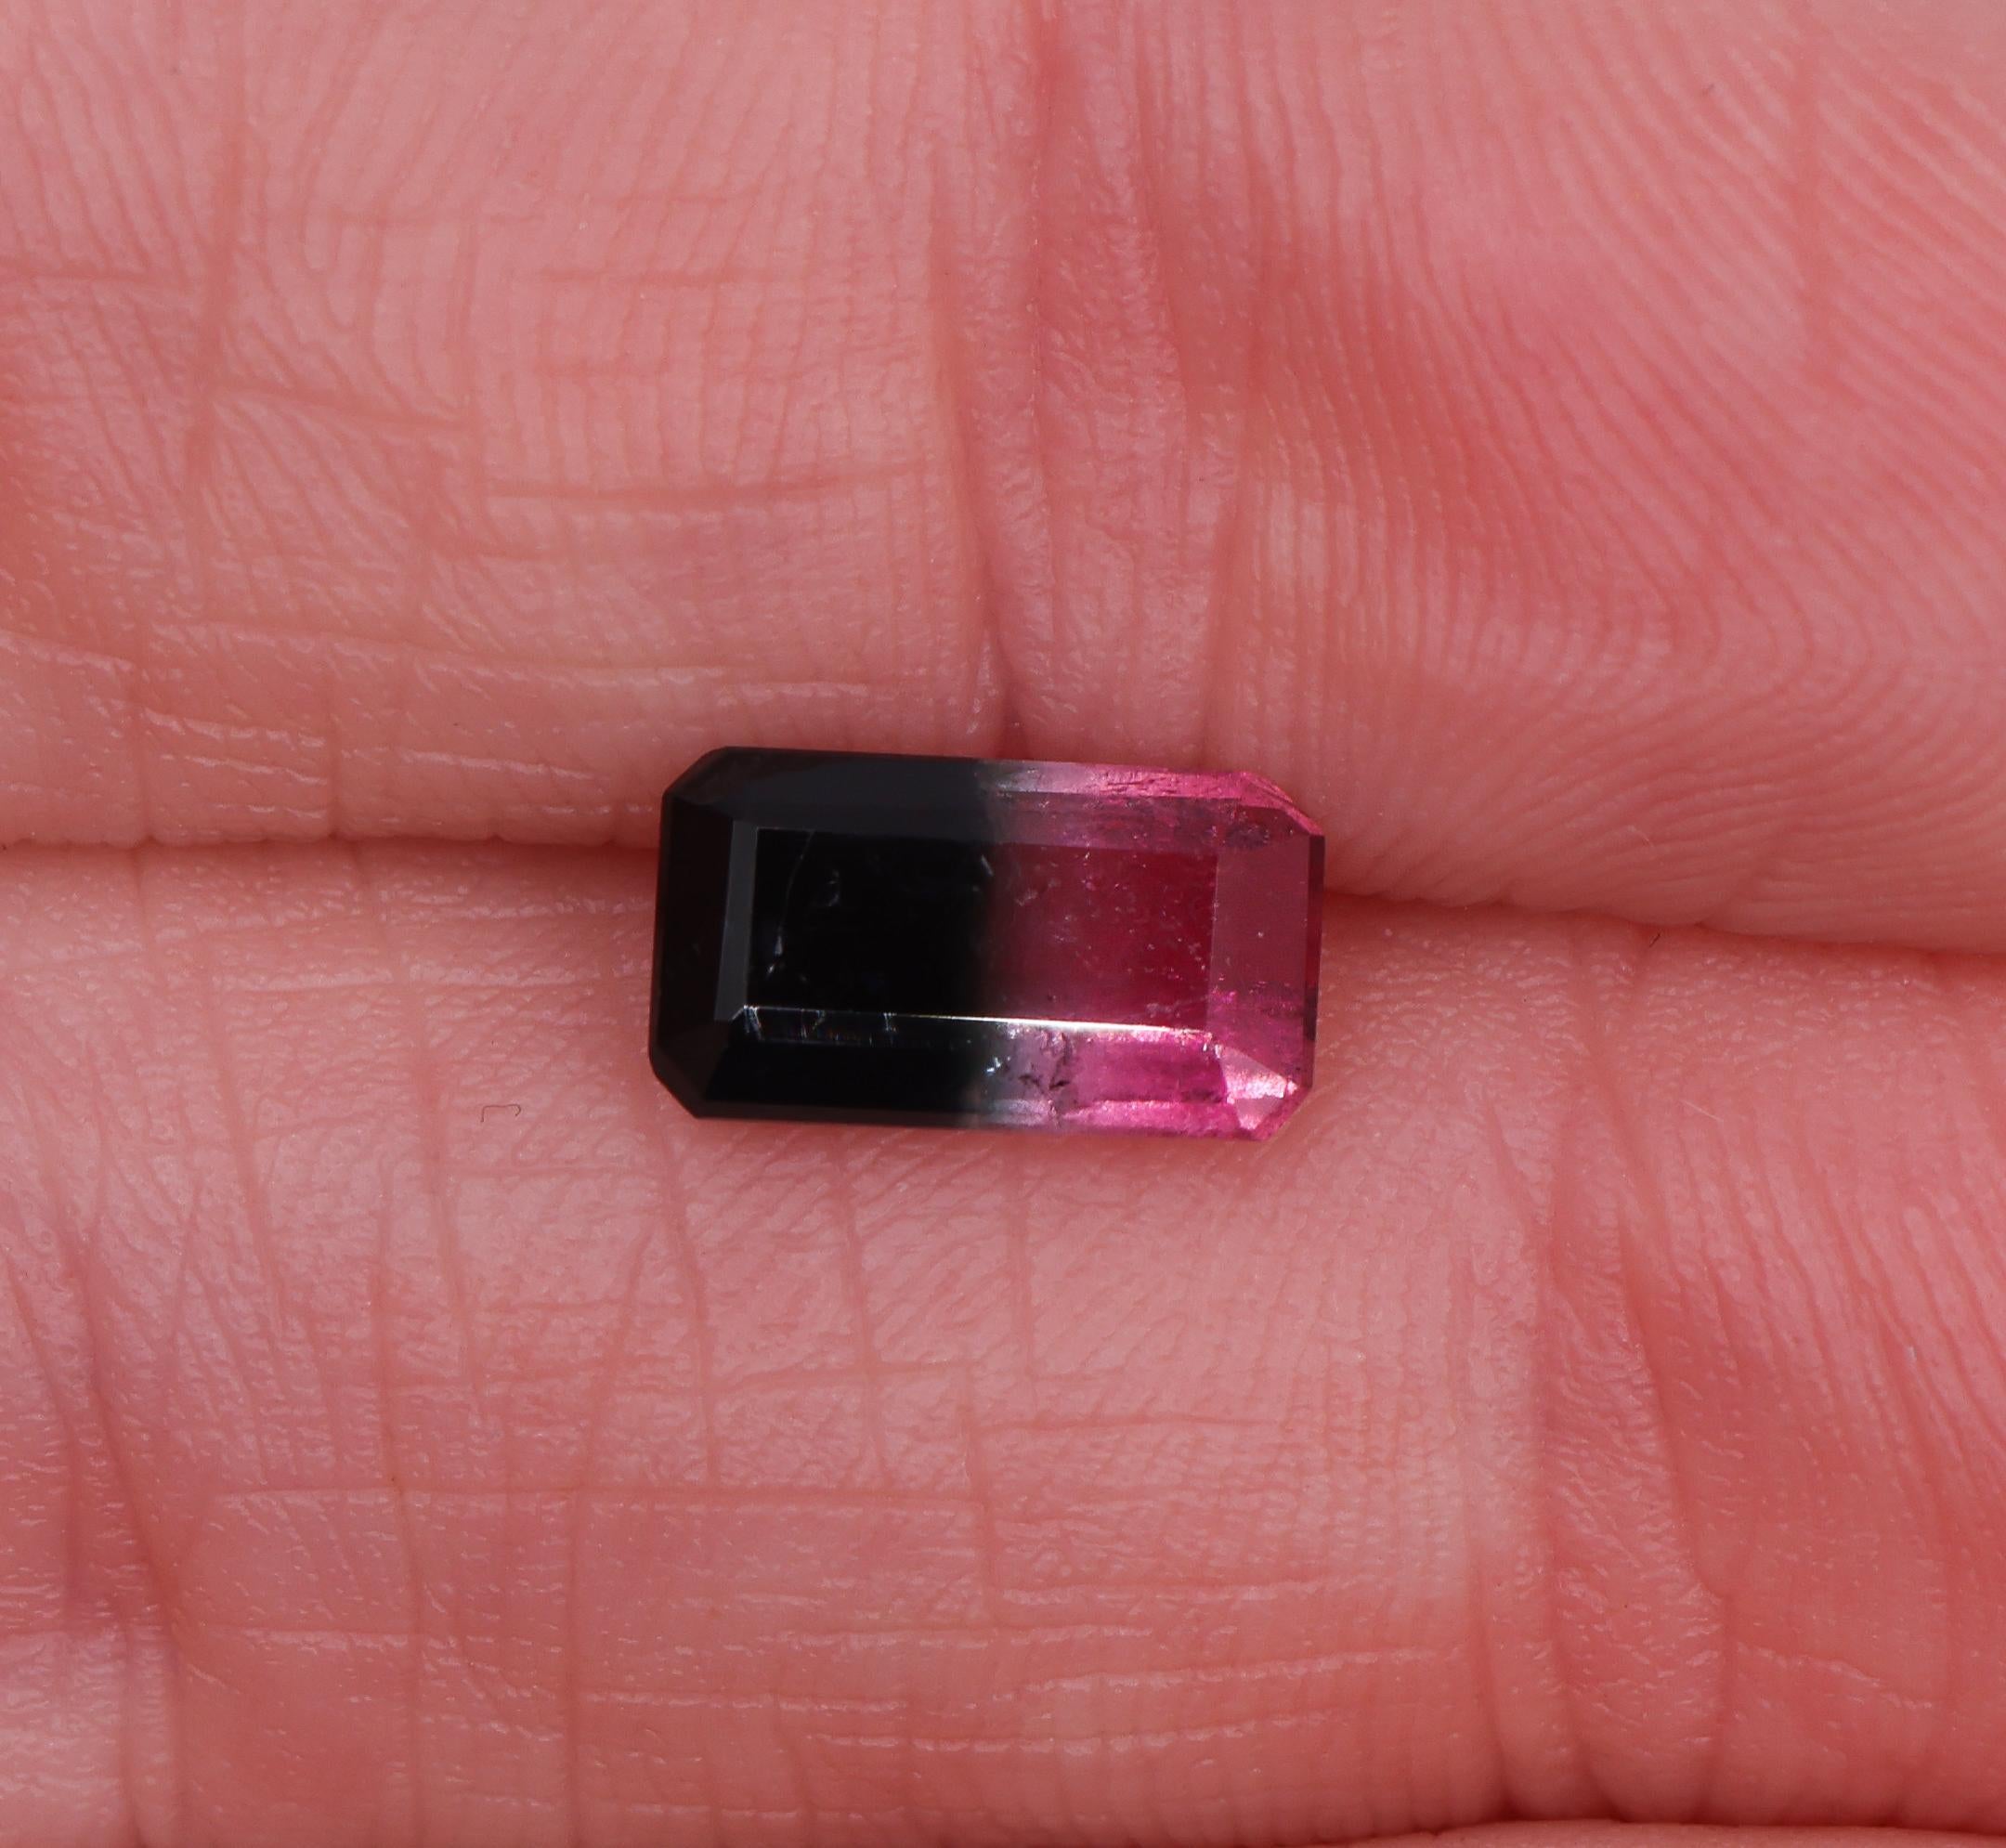 Presenting an elongated emerald cut 1.36 carat tourmaline gemstone! 

This gemstone exhibits a range of colours such as green, white and pink. It's elongated form makes it suitable for accent stones in rings, earrings or pendants, adding a touch of